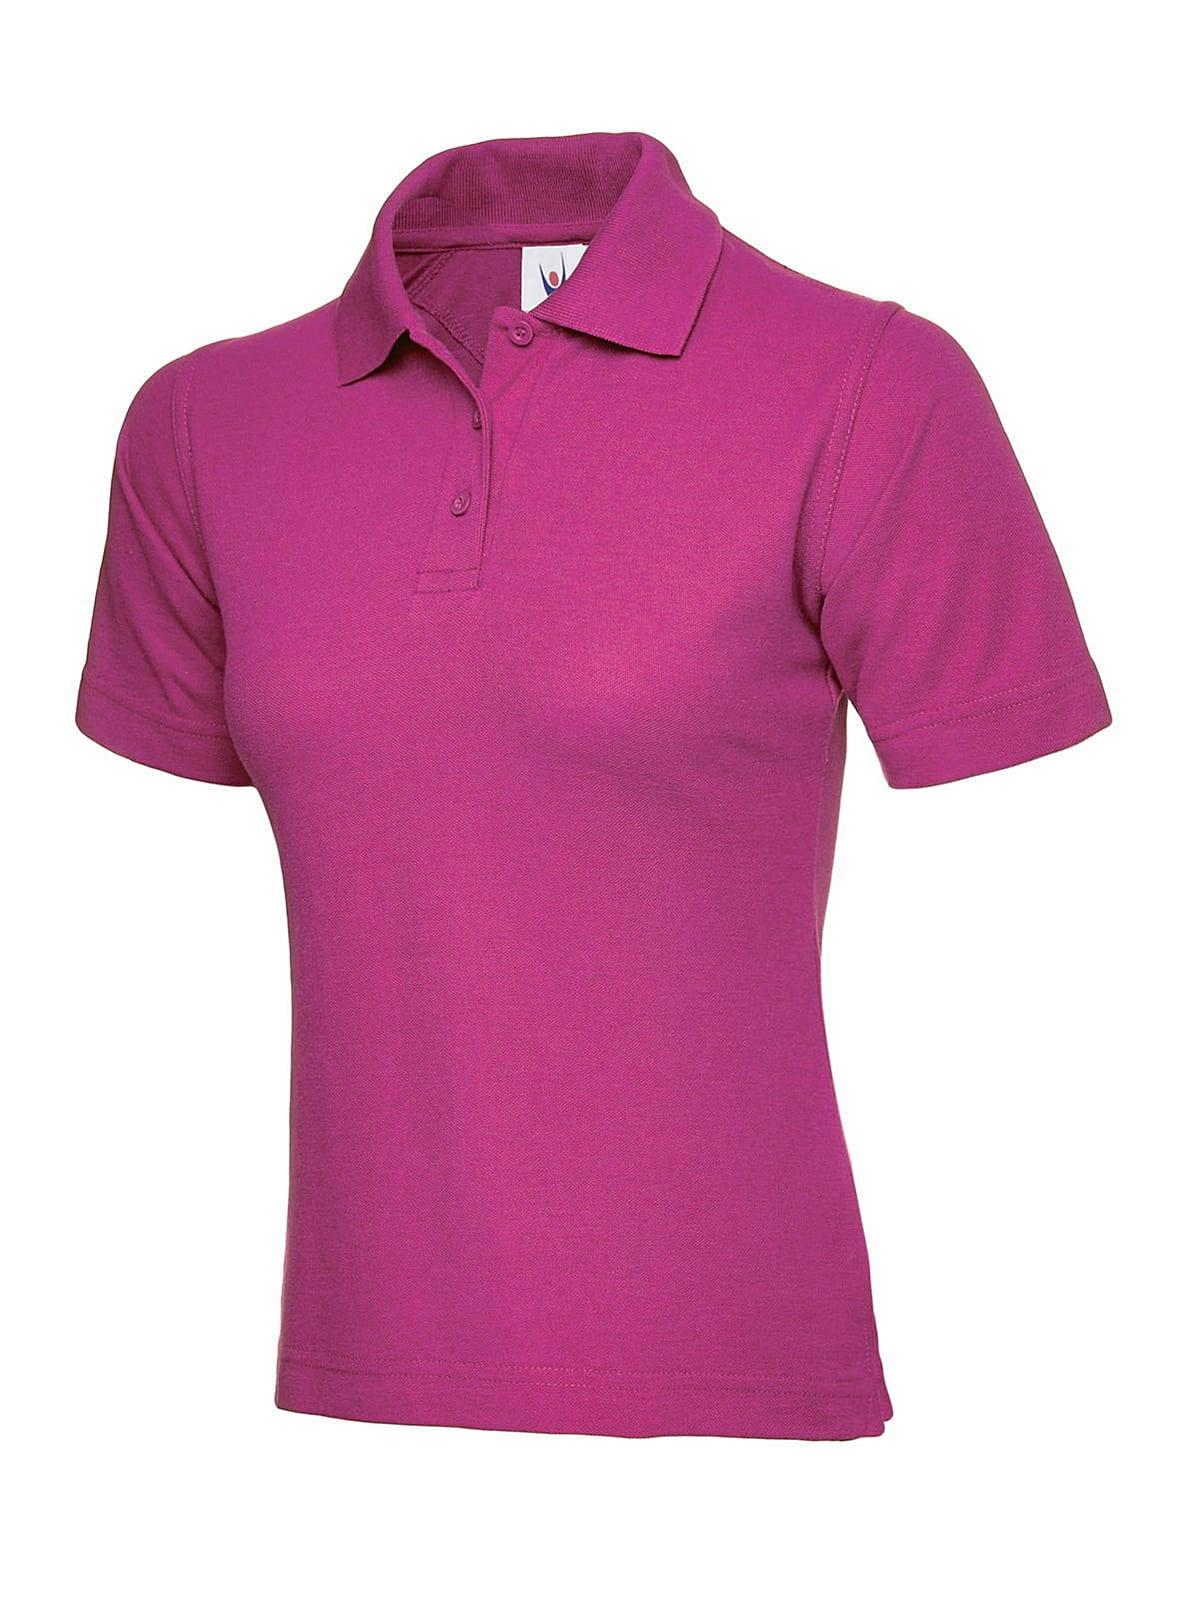 Uneek 220GSM Womens Polo Shirt in Hot Pink (Product Code: UC106)